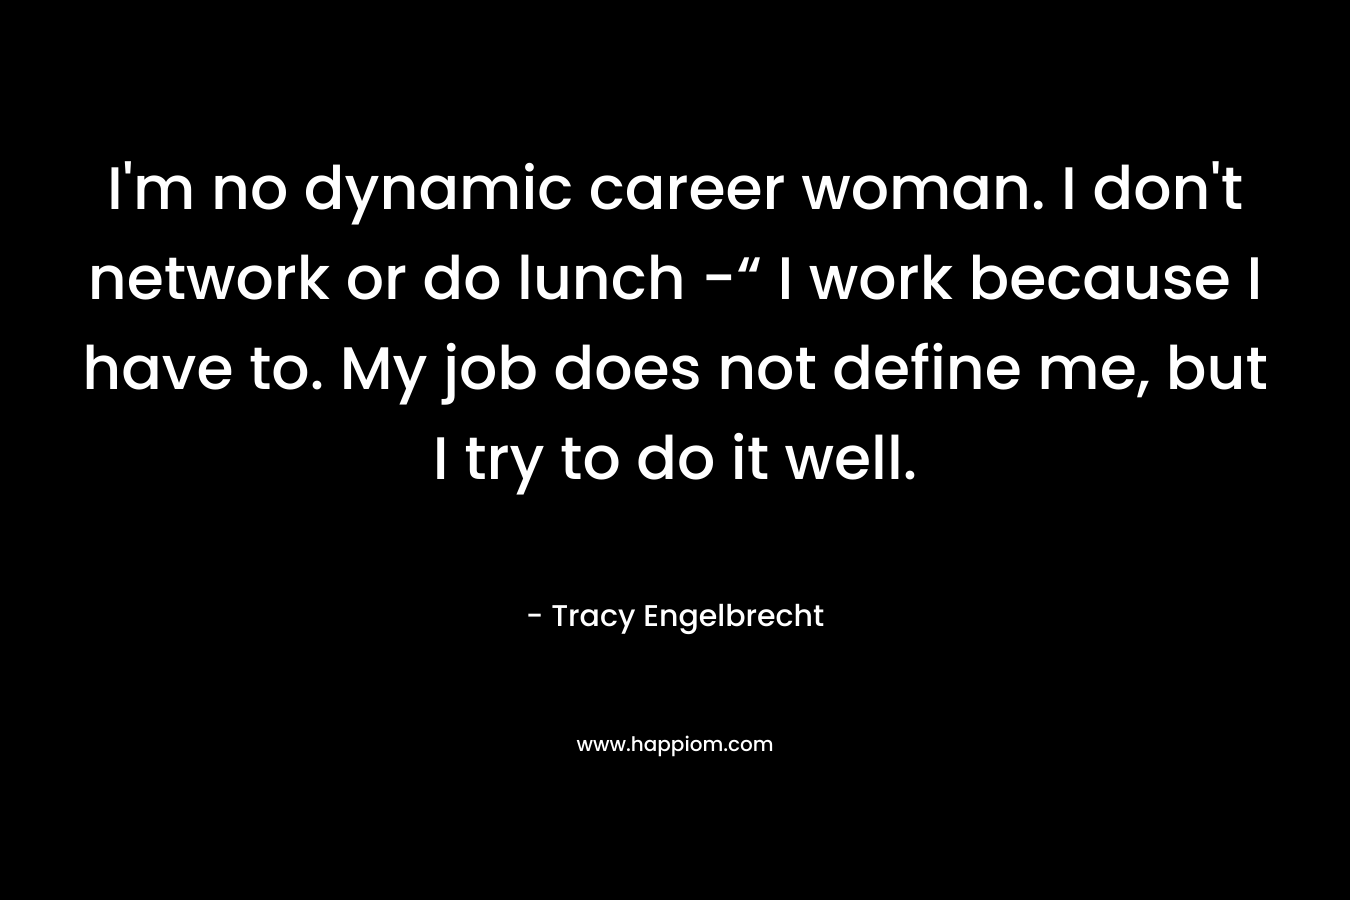 I'm no dynamic career woman. I don't network or do lunch -“ I work because I have to. My job does not define me, but I try to do it well.